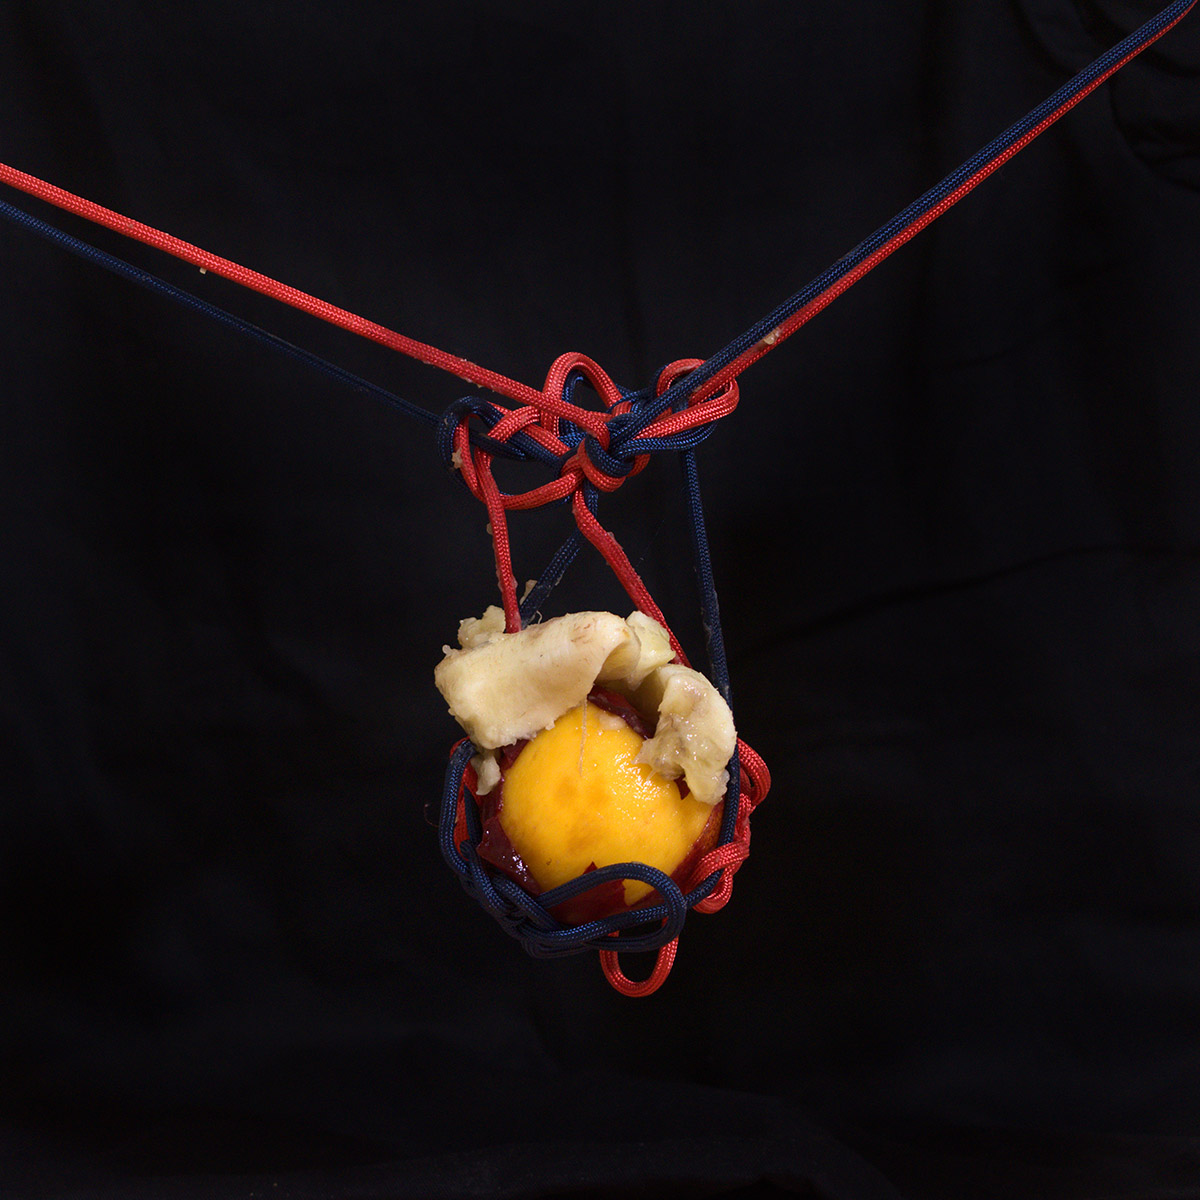 A partially peeled nectarine with banana flesh squashed on top, suspended by blue and red knotted rope in front of a black background.